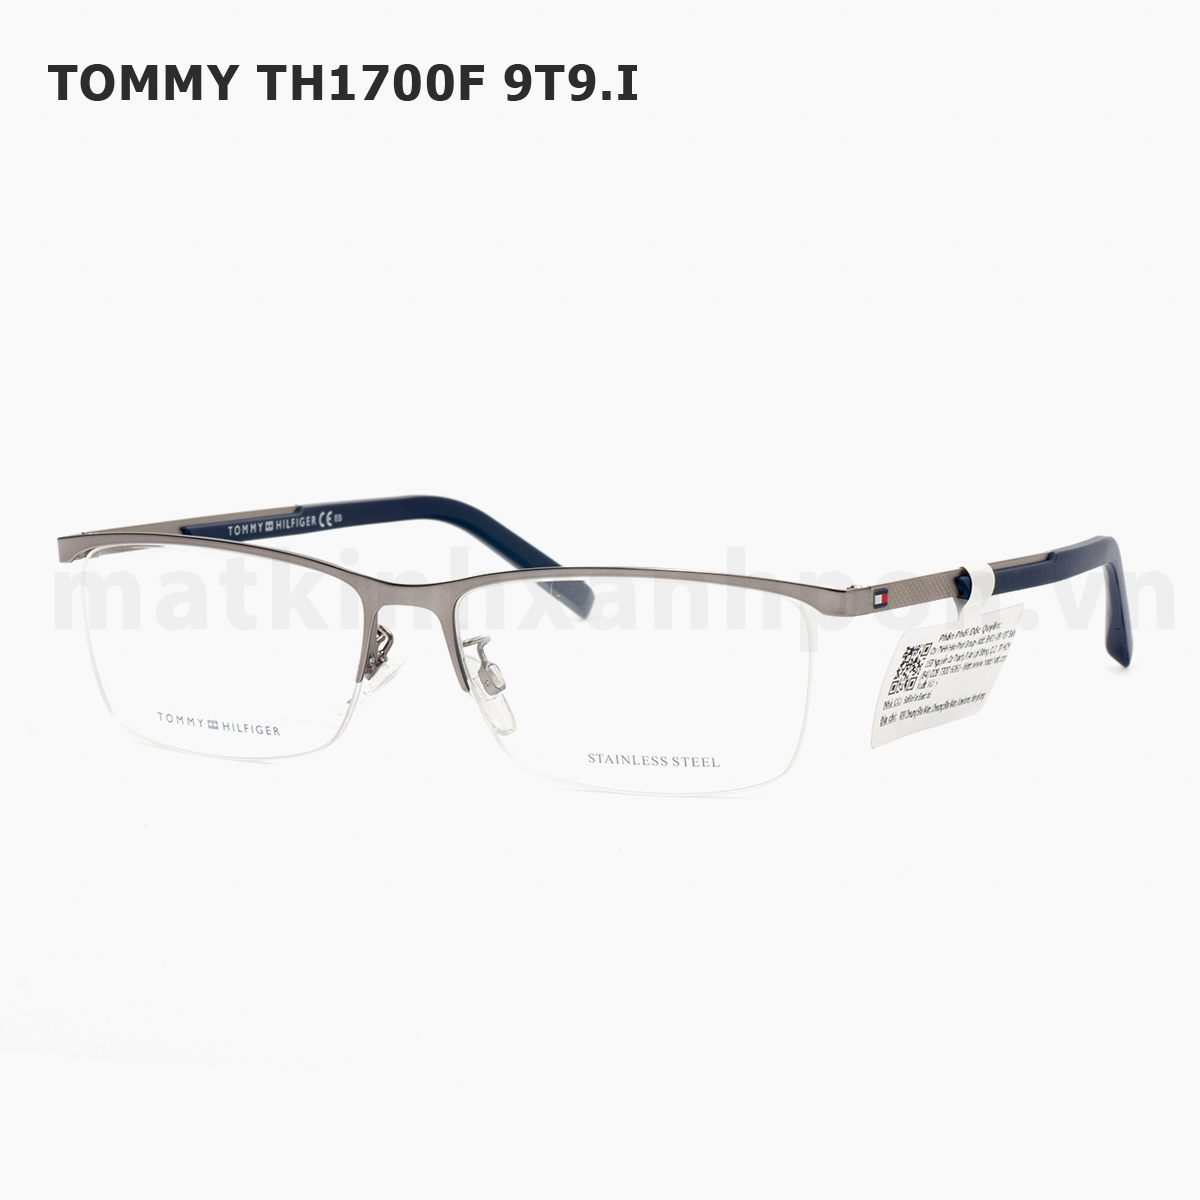 Tommy TH1700F 9T9.I